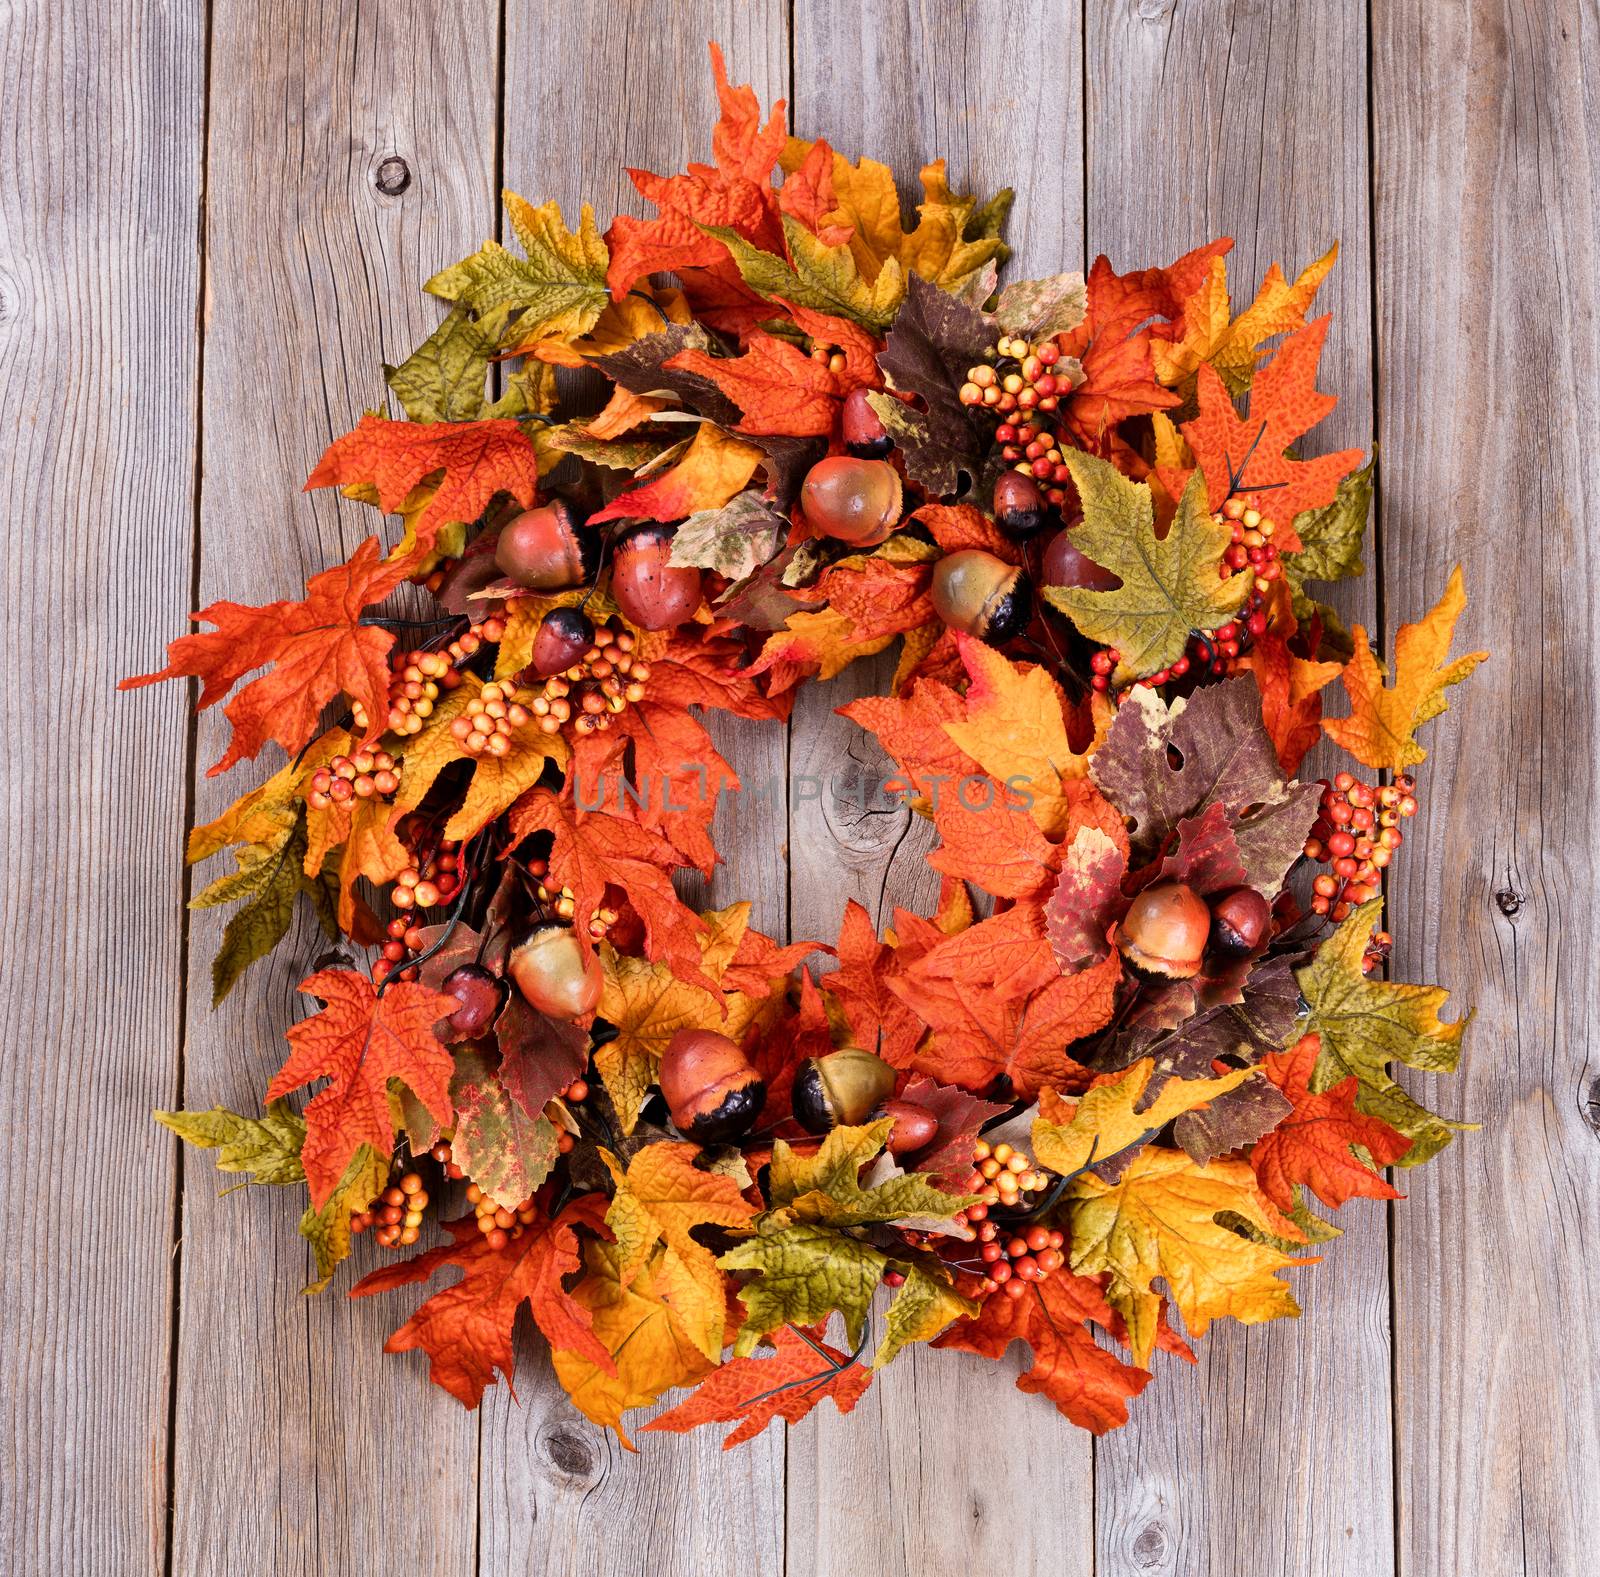 Wreath made of autumn leaves and acorns on rustic wooden boards by tab1962